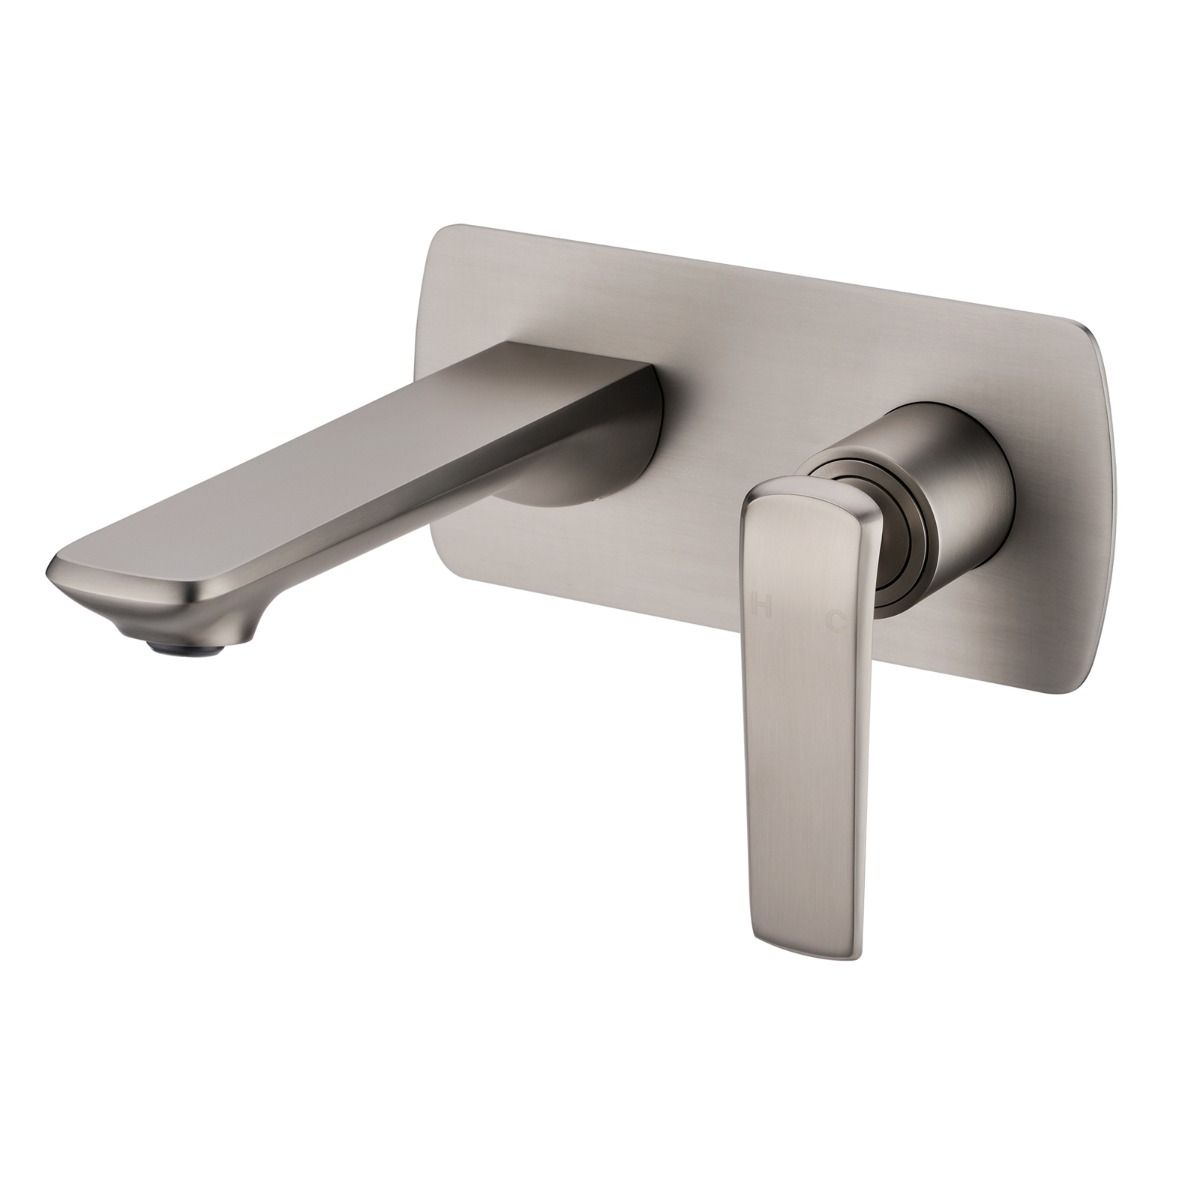 Norico Esperia Brushed Nickel Wall Mixer With Spout